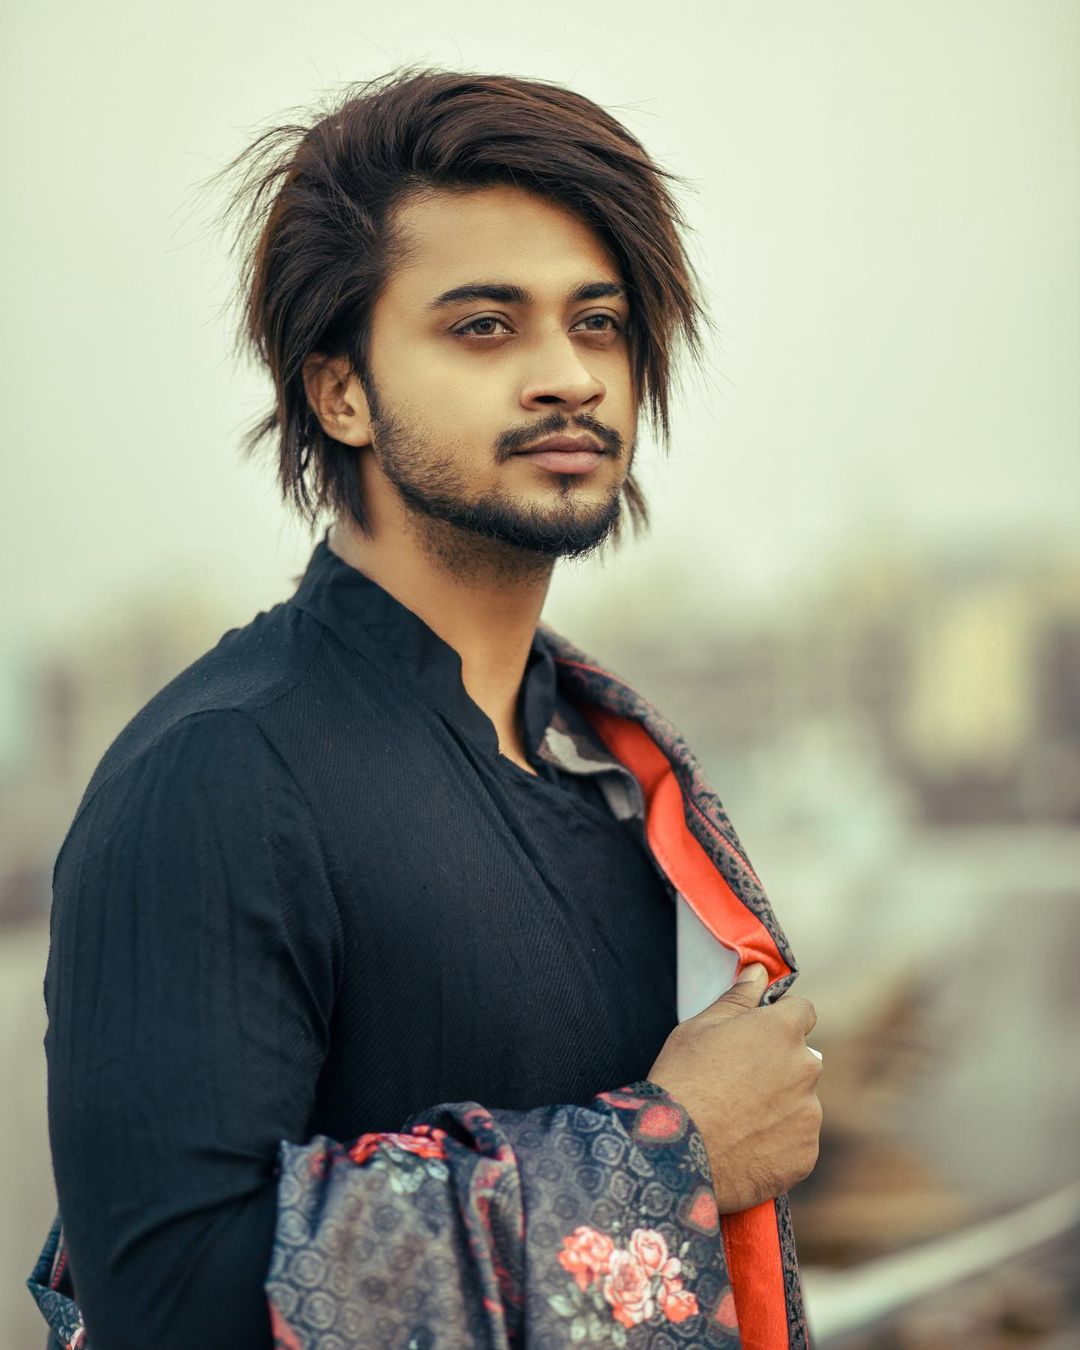 Hasnain Khan West Age, Height, Wife, Family – Biographyprofiles